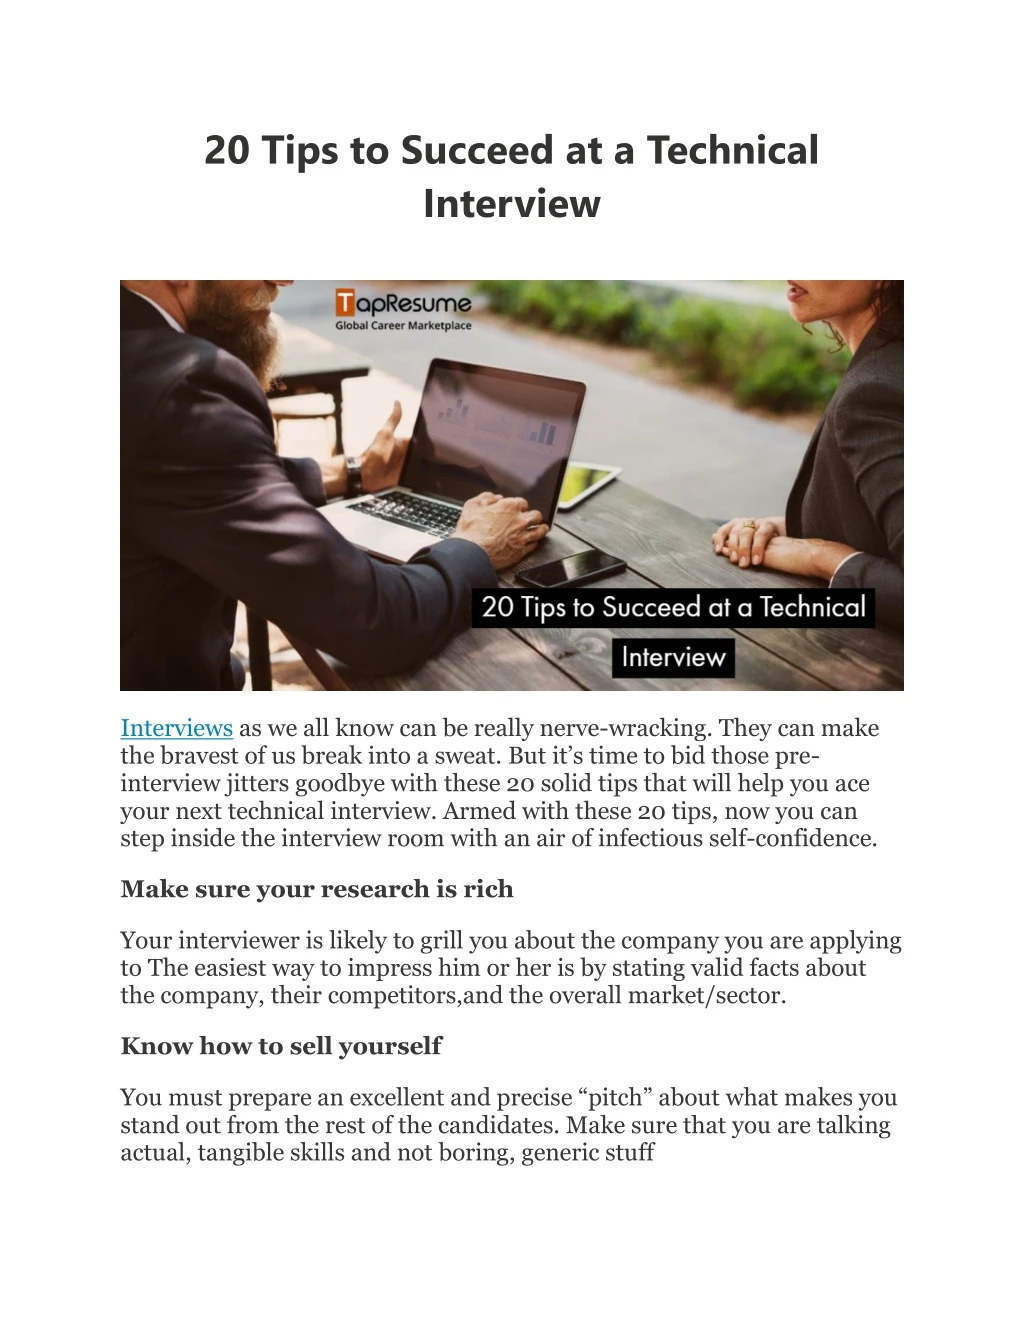 20 tips to succeed at a technical interview